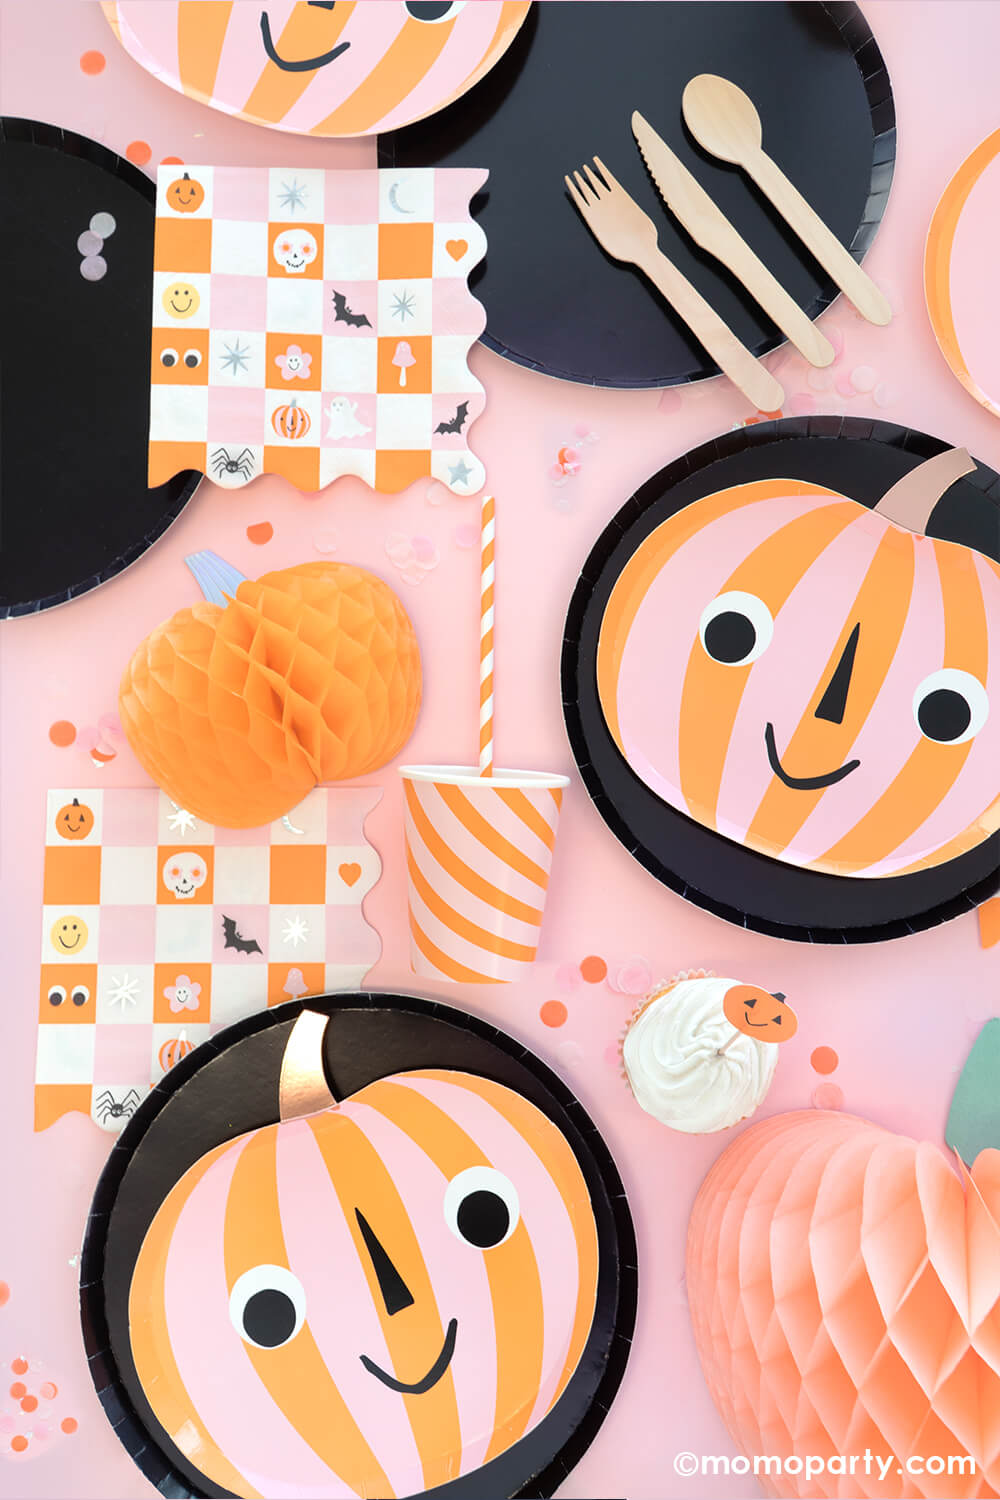 A pink girly Halloween party table featuring Momo Party's orange and pink striped pumpkin shaped plates layered on 10" black large plates, groovy Halloween checkered napkins with Halloween character designs including skulls, pumpkins, bats, spiders ghosts and googly eyes, with honeycomb pumpkins around and festive confetti in orange and pink colors, this makes a great inspiration for a not-so-scary kid-friendly Halloween party tablescape.